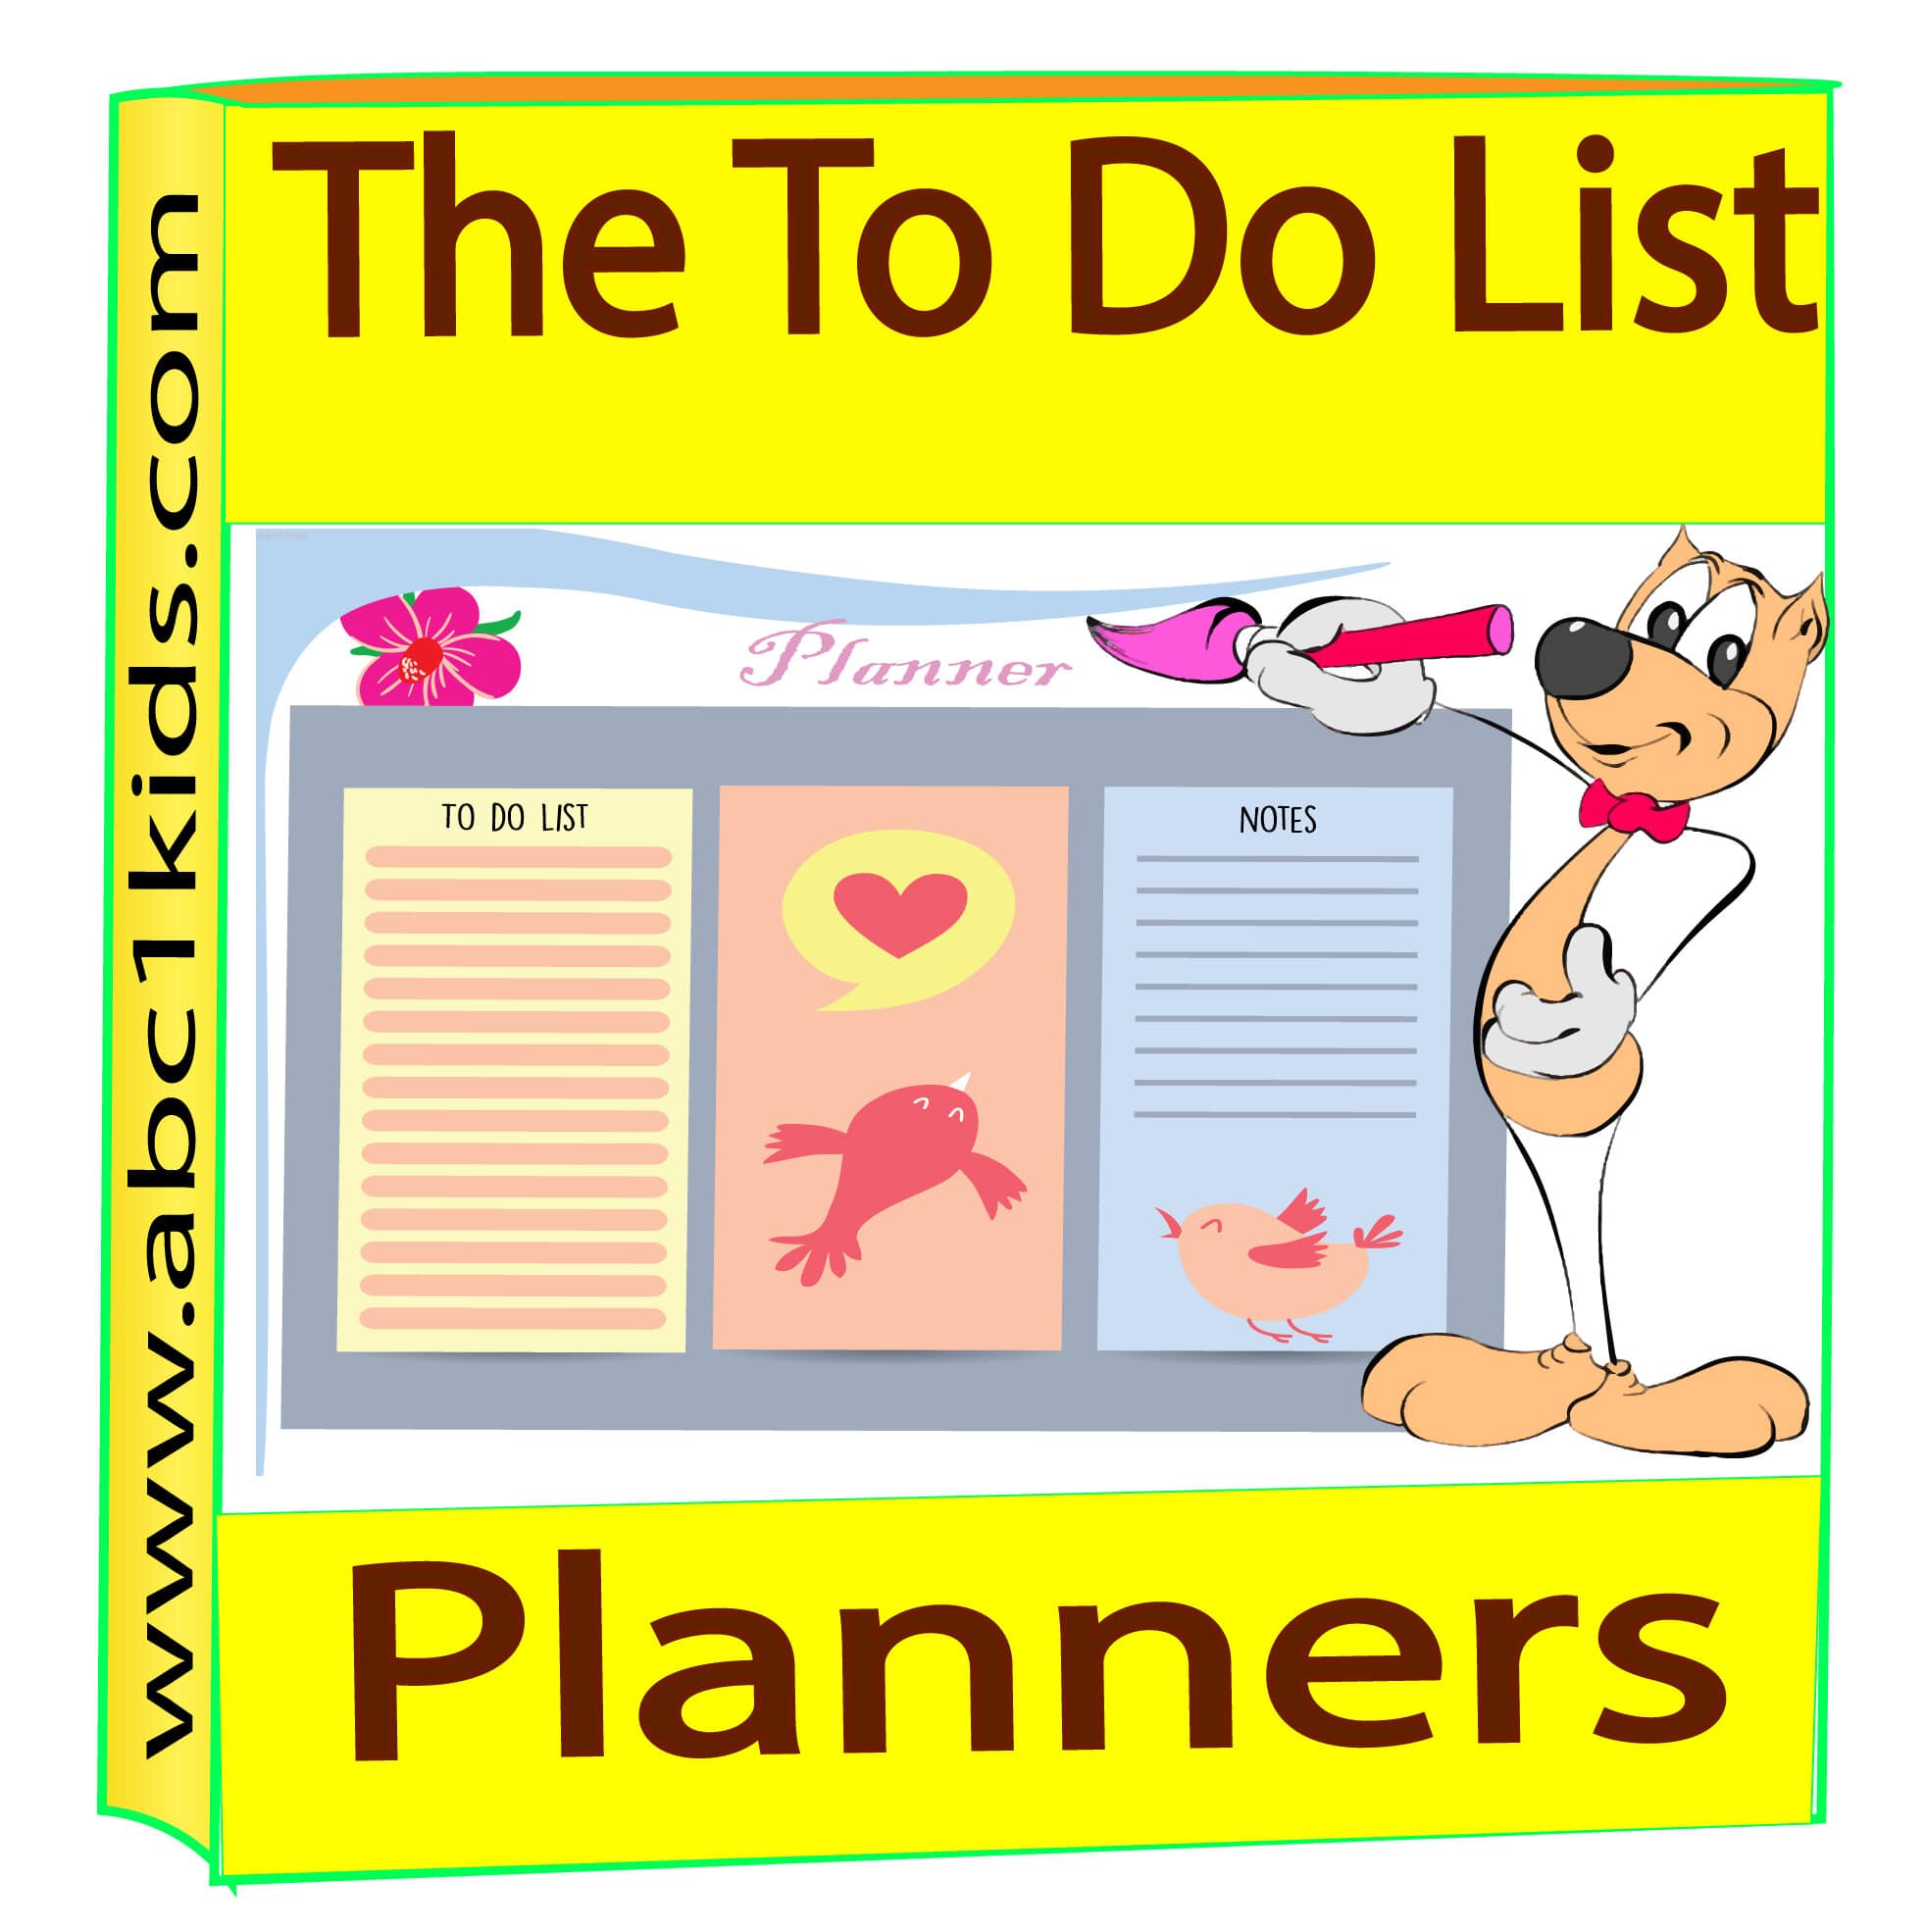 The to do list planners